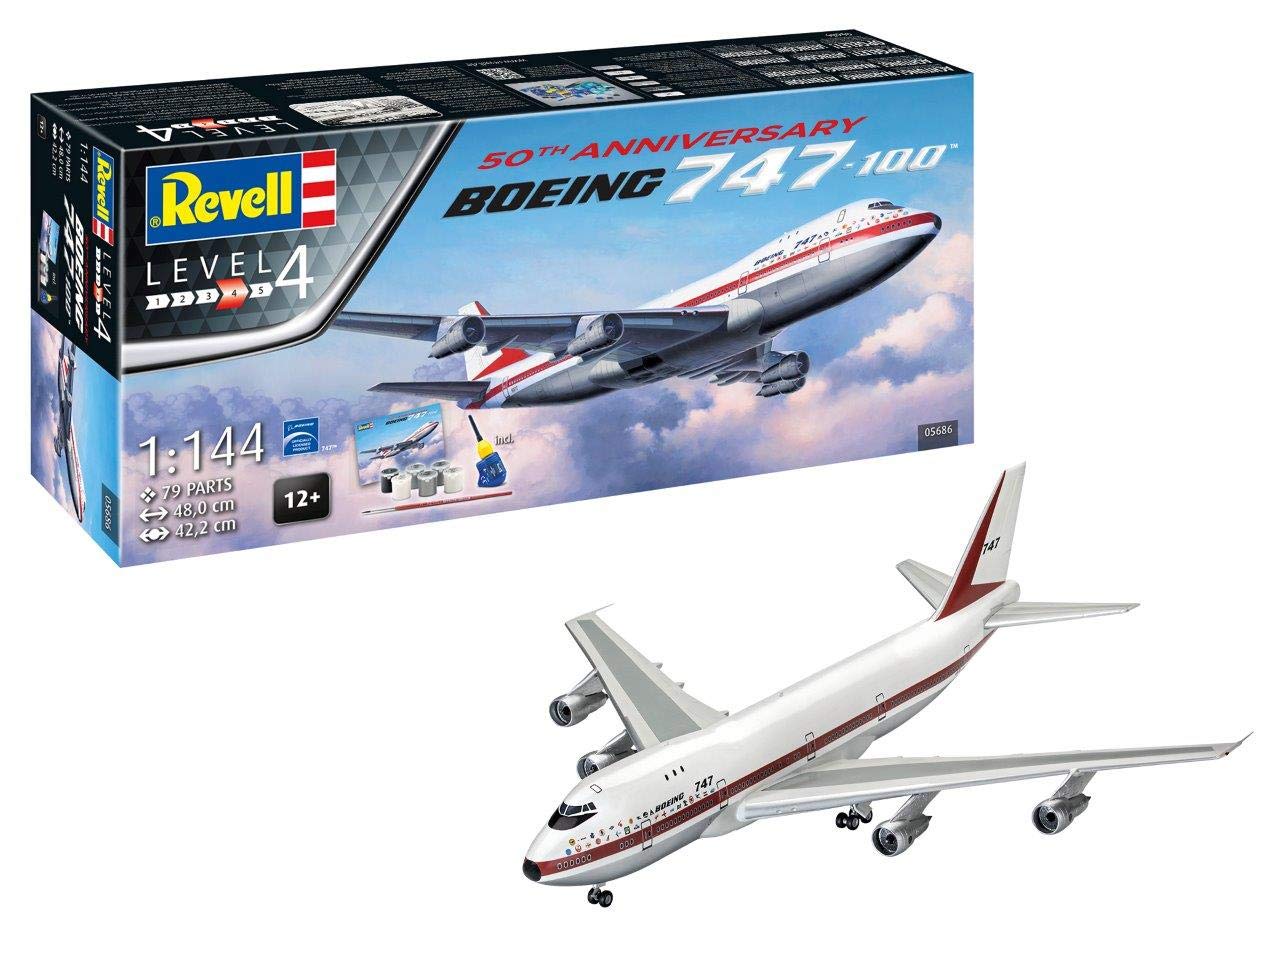 Revell 05686 Anniversary Set Boeing 747-100 50Th Anniversary Accurate Model